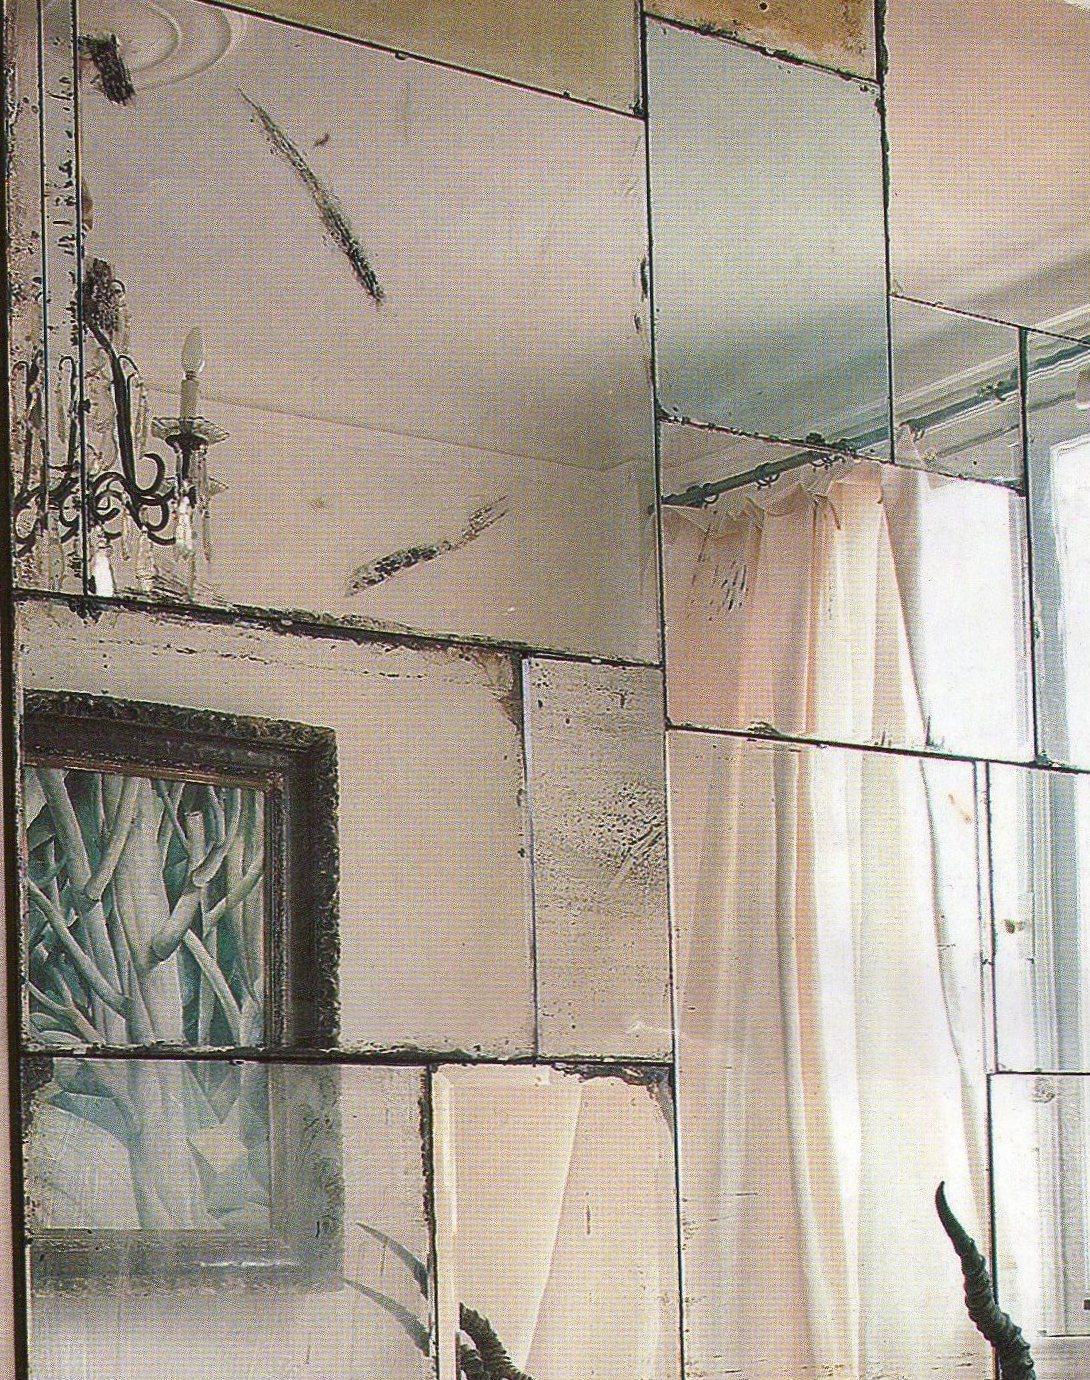 Spanish Industrial Custom Made Artisanal Mirrors Hand-Aged Authentic Finish Frameless L For Sale